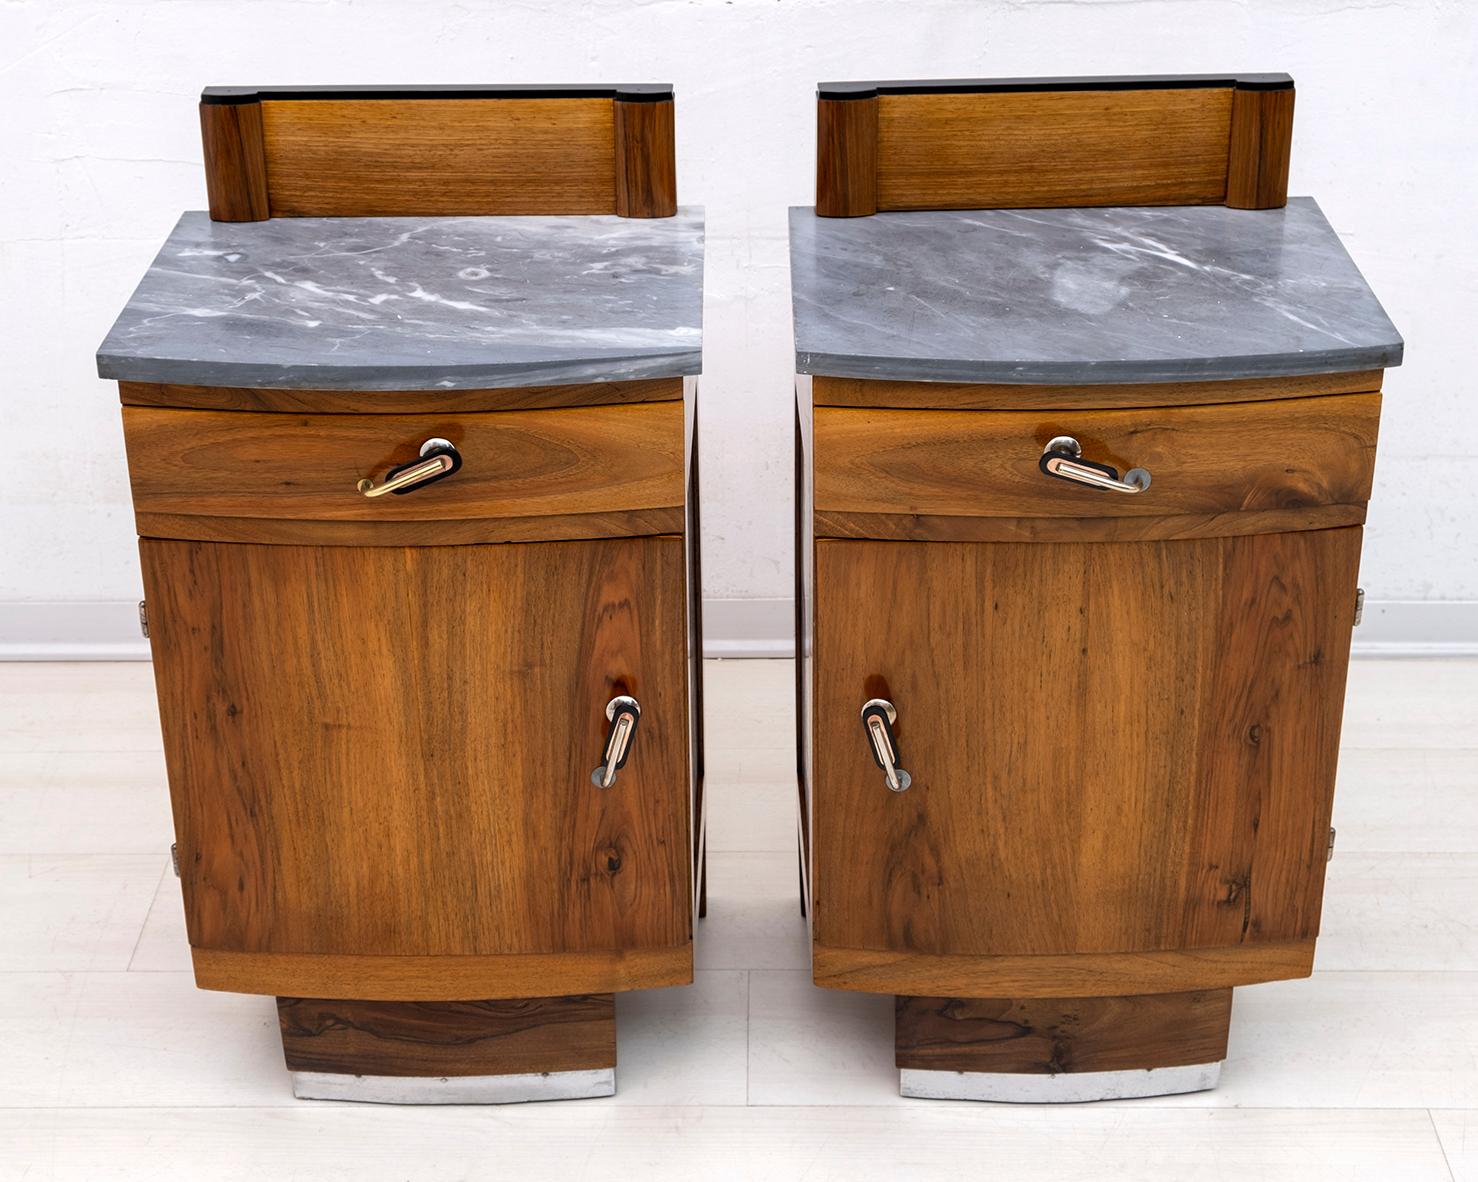 This pair of bedside tables was produced in Italy in the 1920s, Art Deco period. They were made of solid European walnut, the top is in graphite gray marble, the structure is in poplar and the handles are in brass and Bakelite. The band below is in